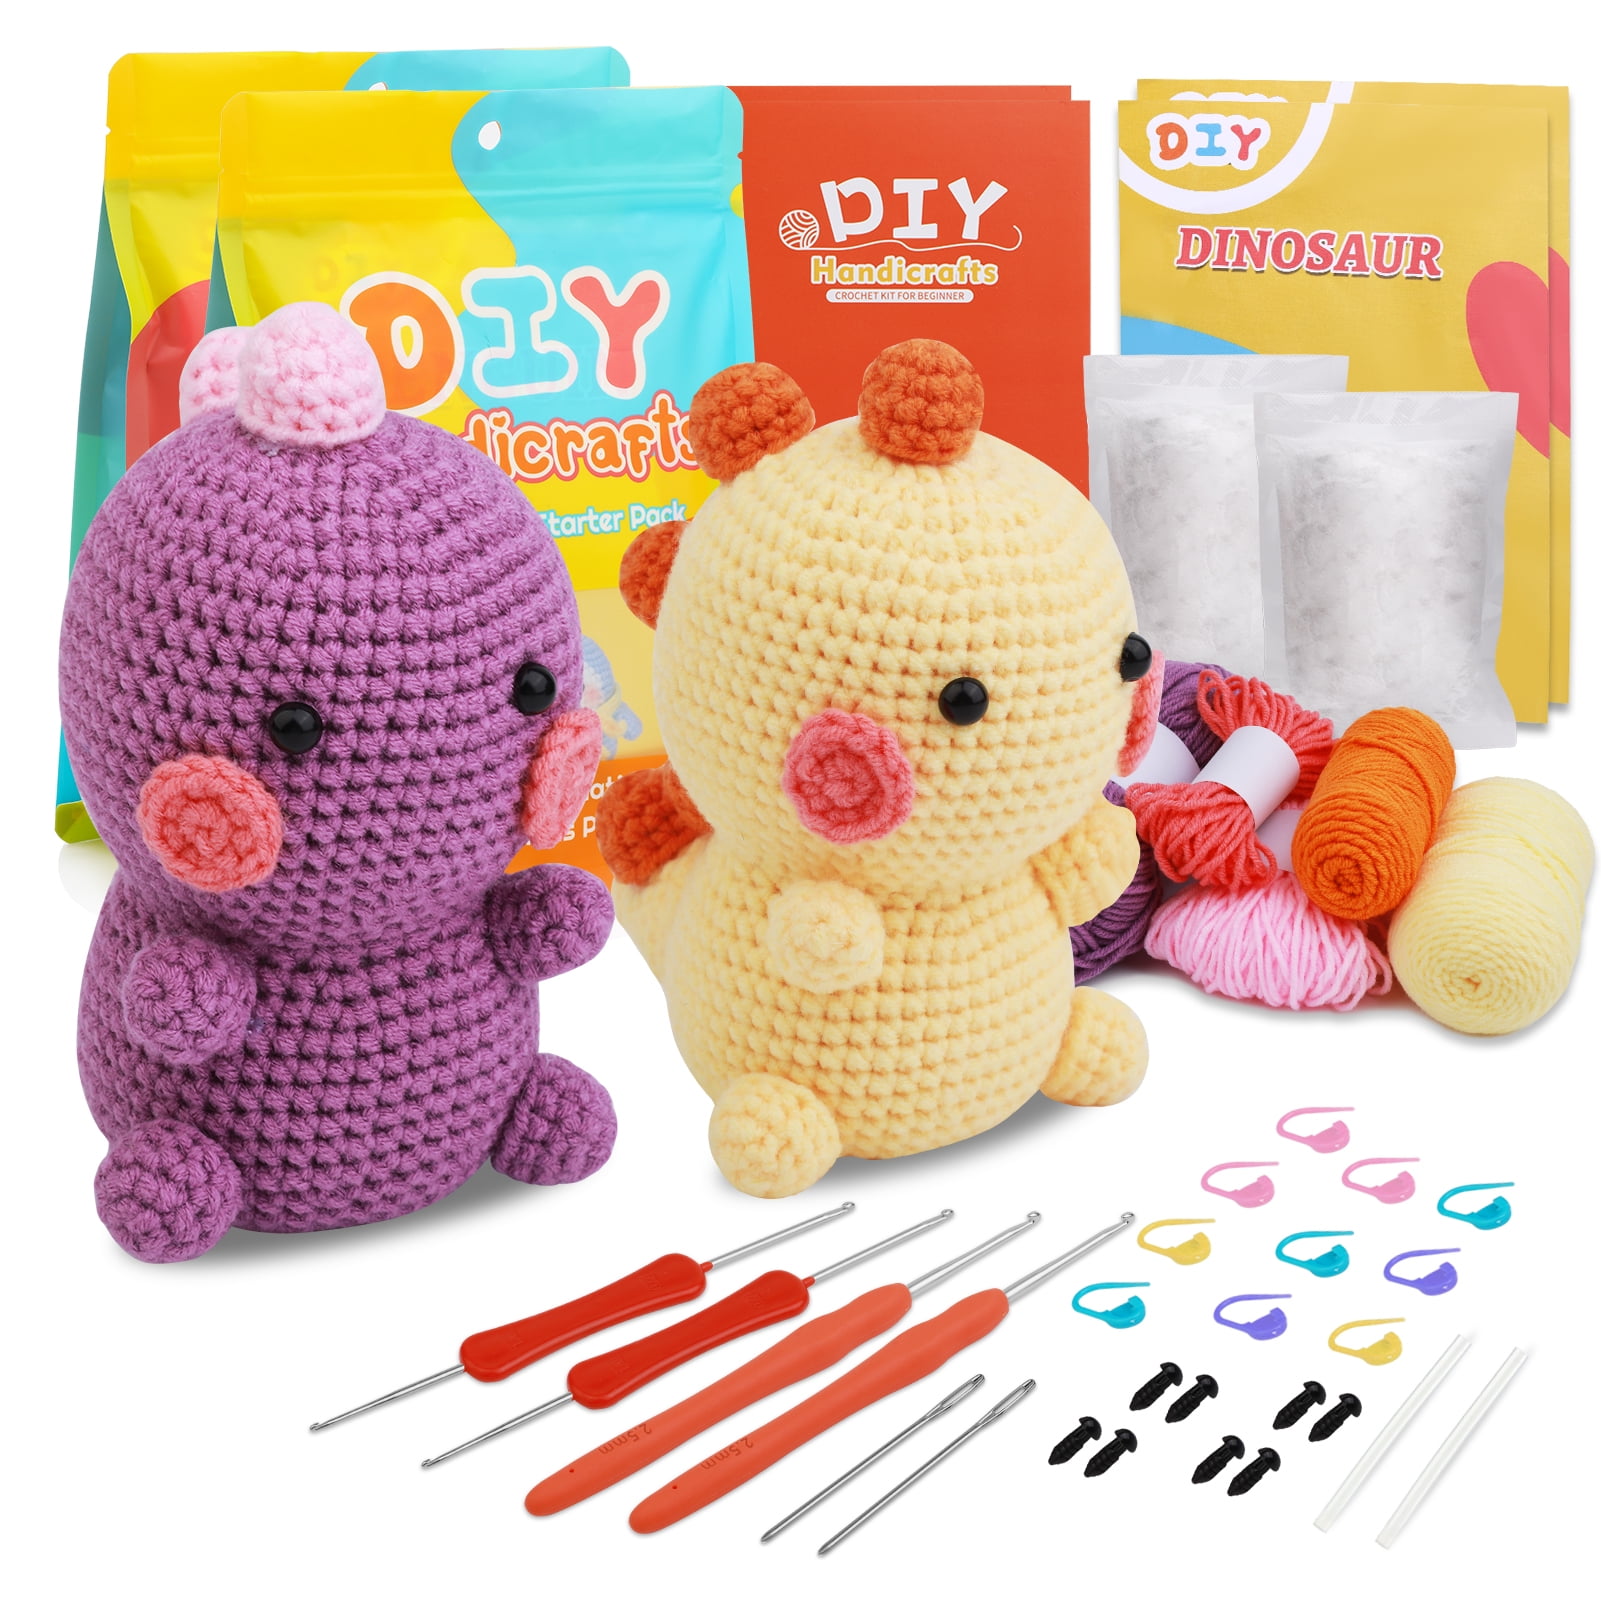 UzecPk Beginners Crochet Kit, Cute Flower Crochet Kit for Beginers and  Experts, All in One Crochet Knitting Kit with Step-by-Step Instructions  Video(Red) 